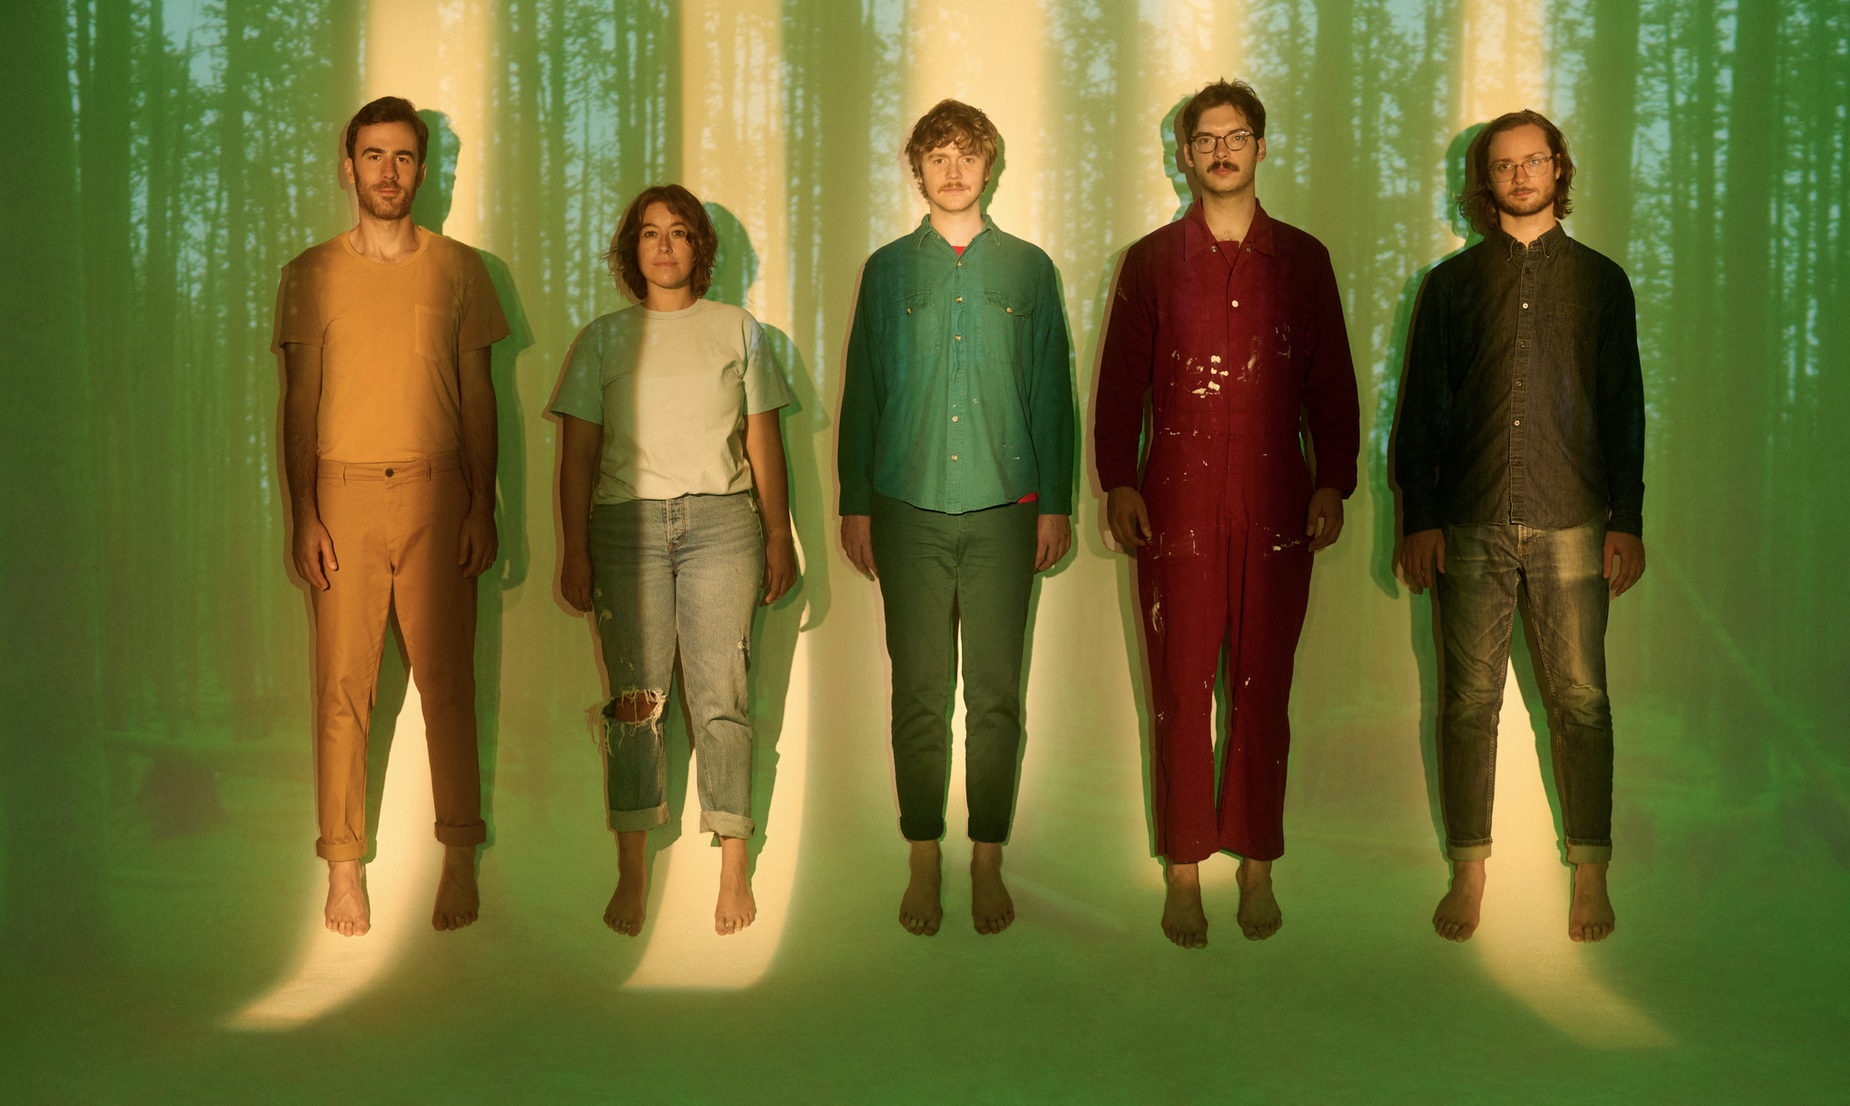 PINEGROVE – we’re in this together